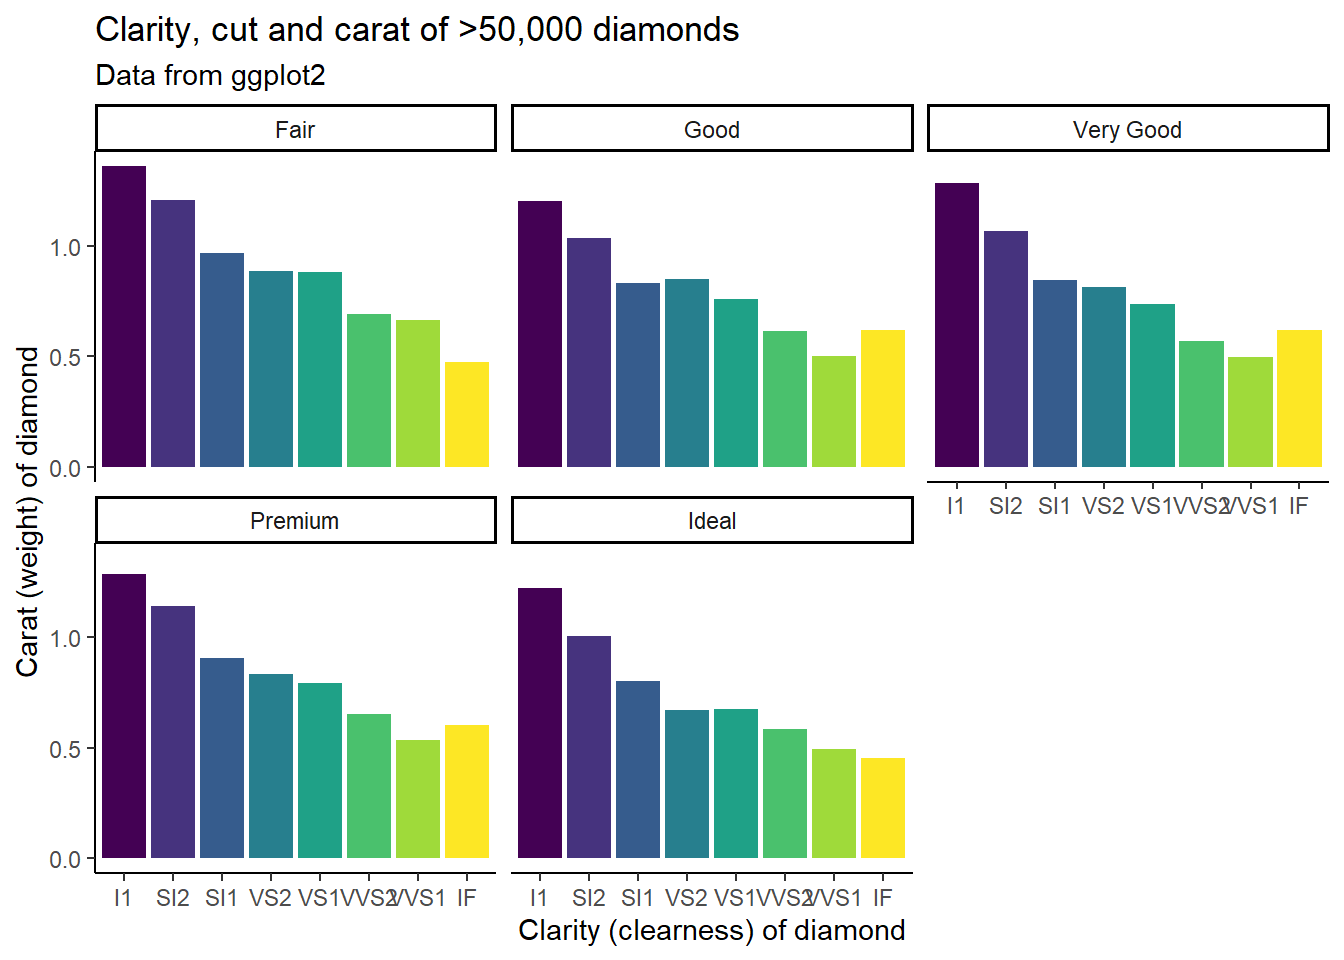 A ggplot object with a geom_bar, the carat of diamonds by their clarity